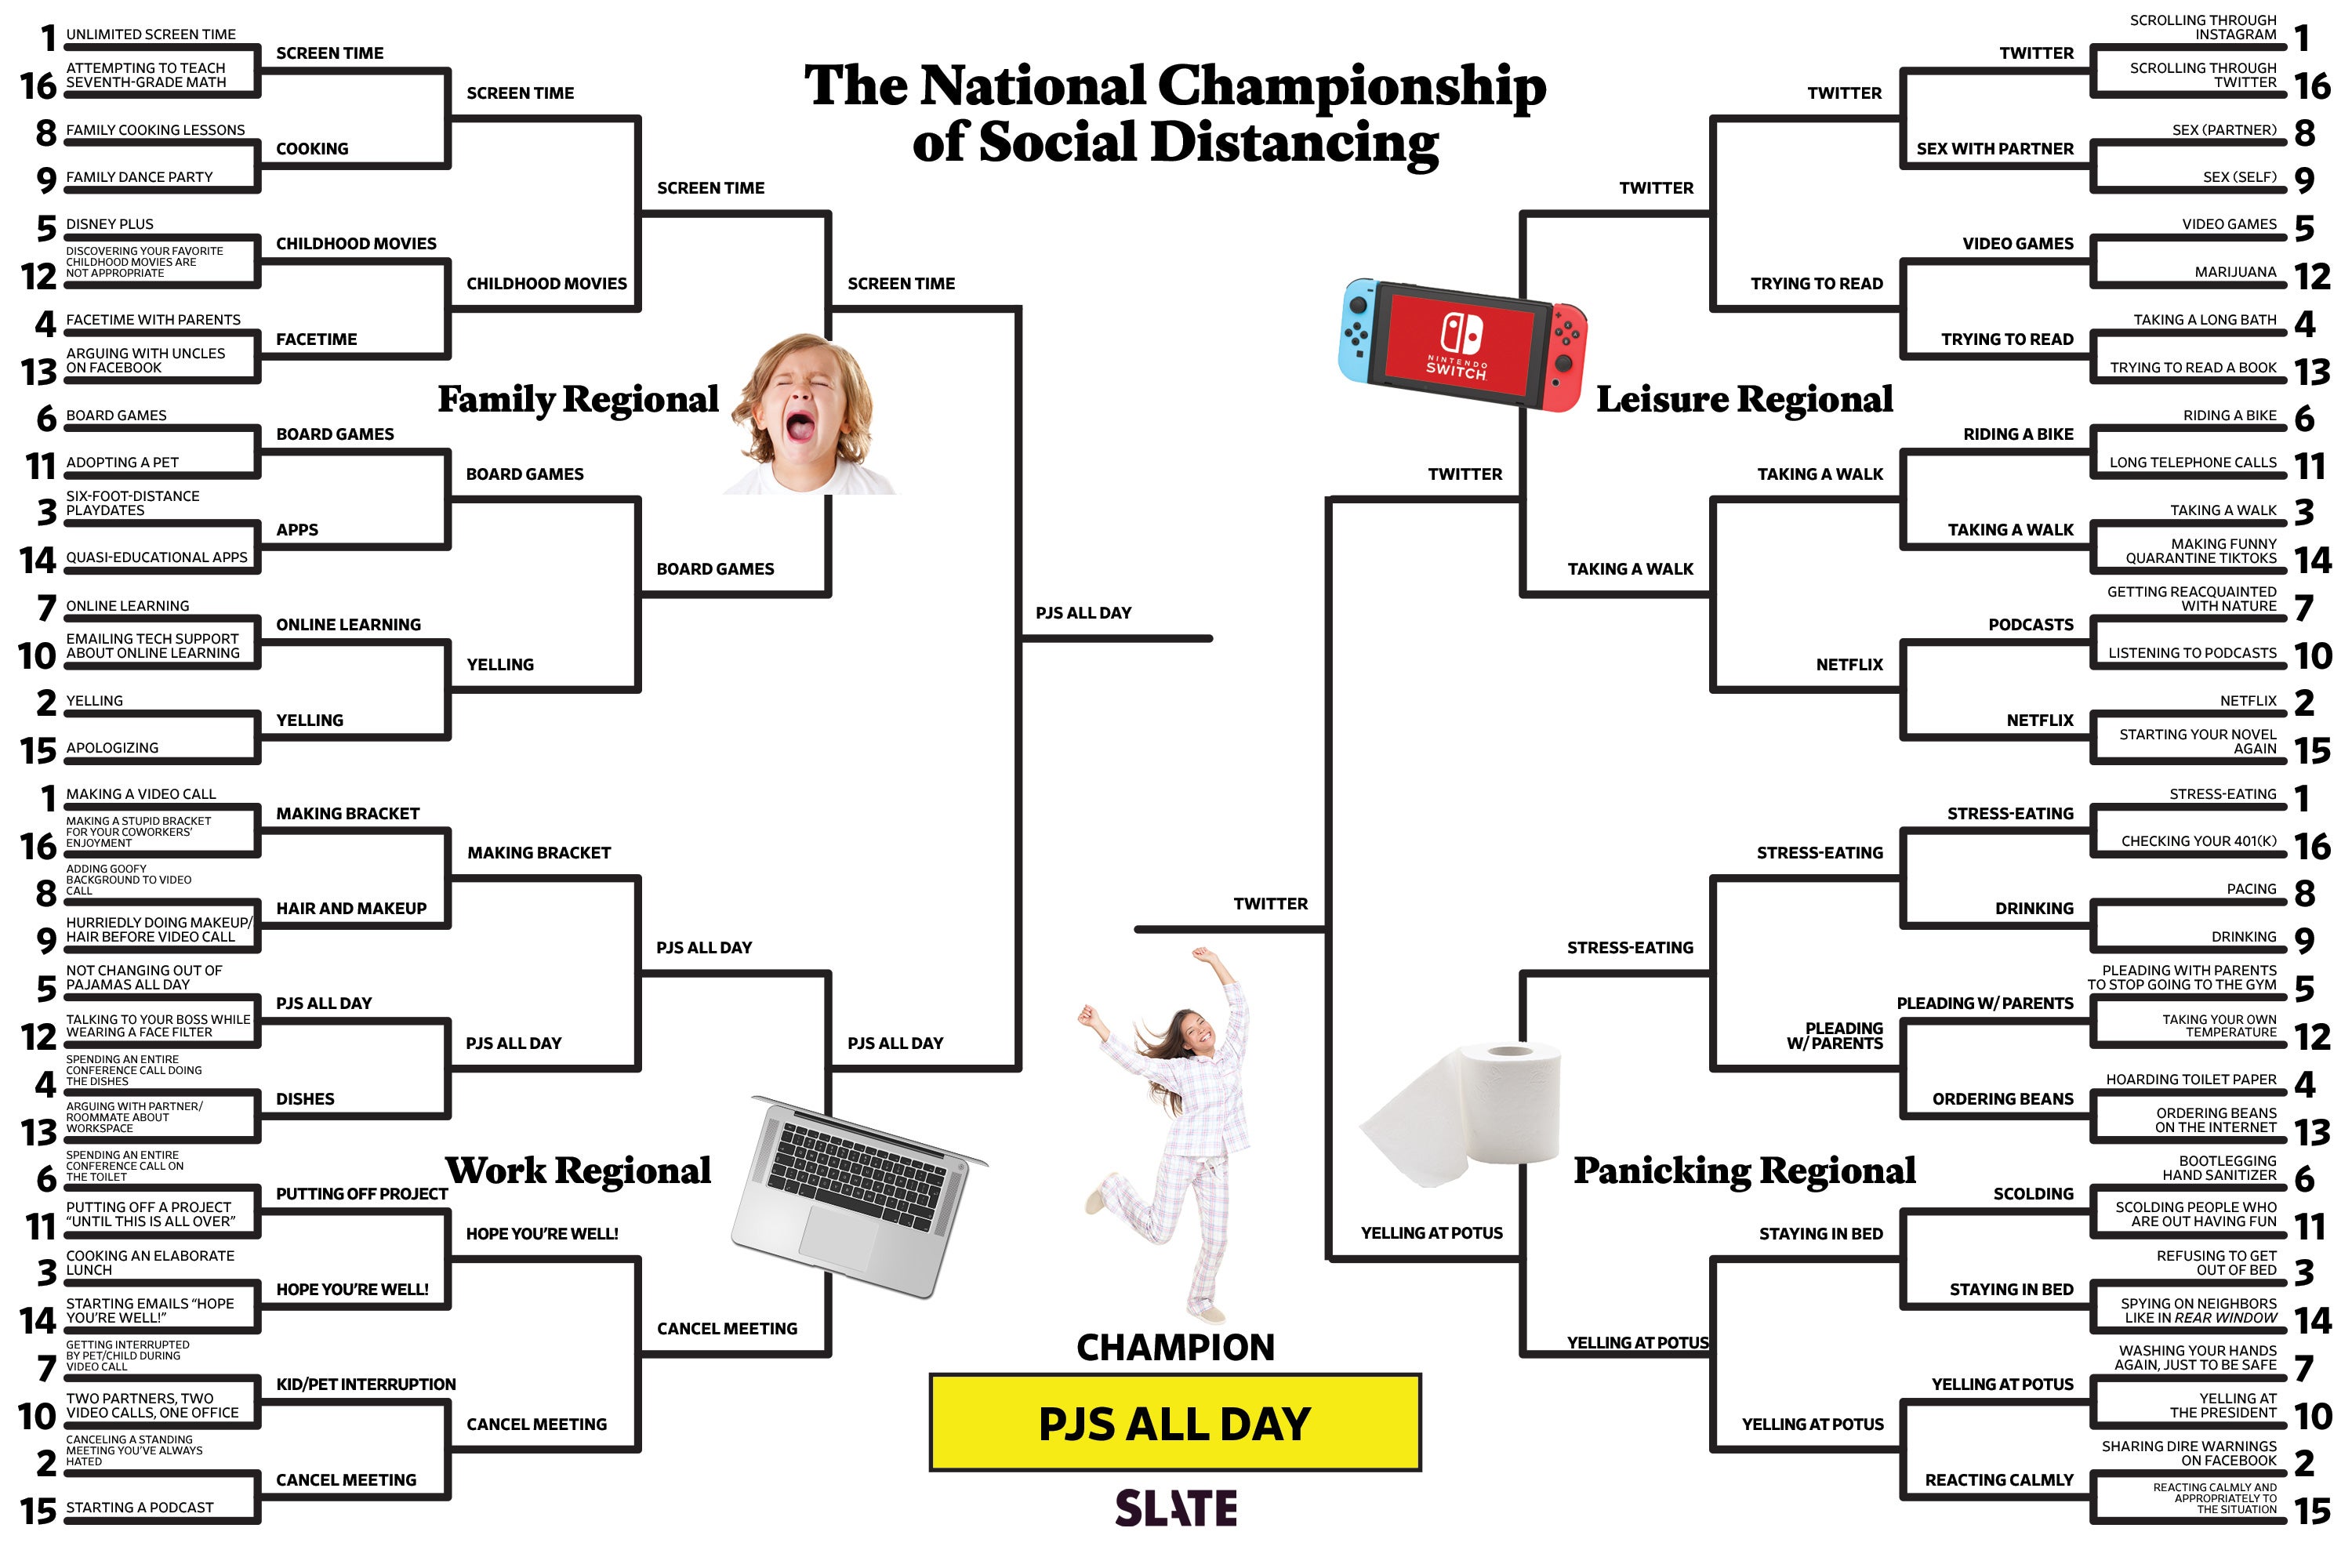 The full The National Championship of Social Distancing bracket, featuring the Family Regional, the Leisure Regional, the Work Regional, and the Panicking Regional.